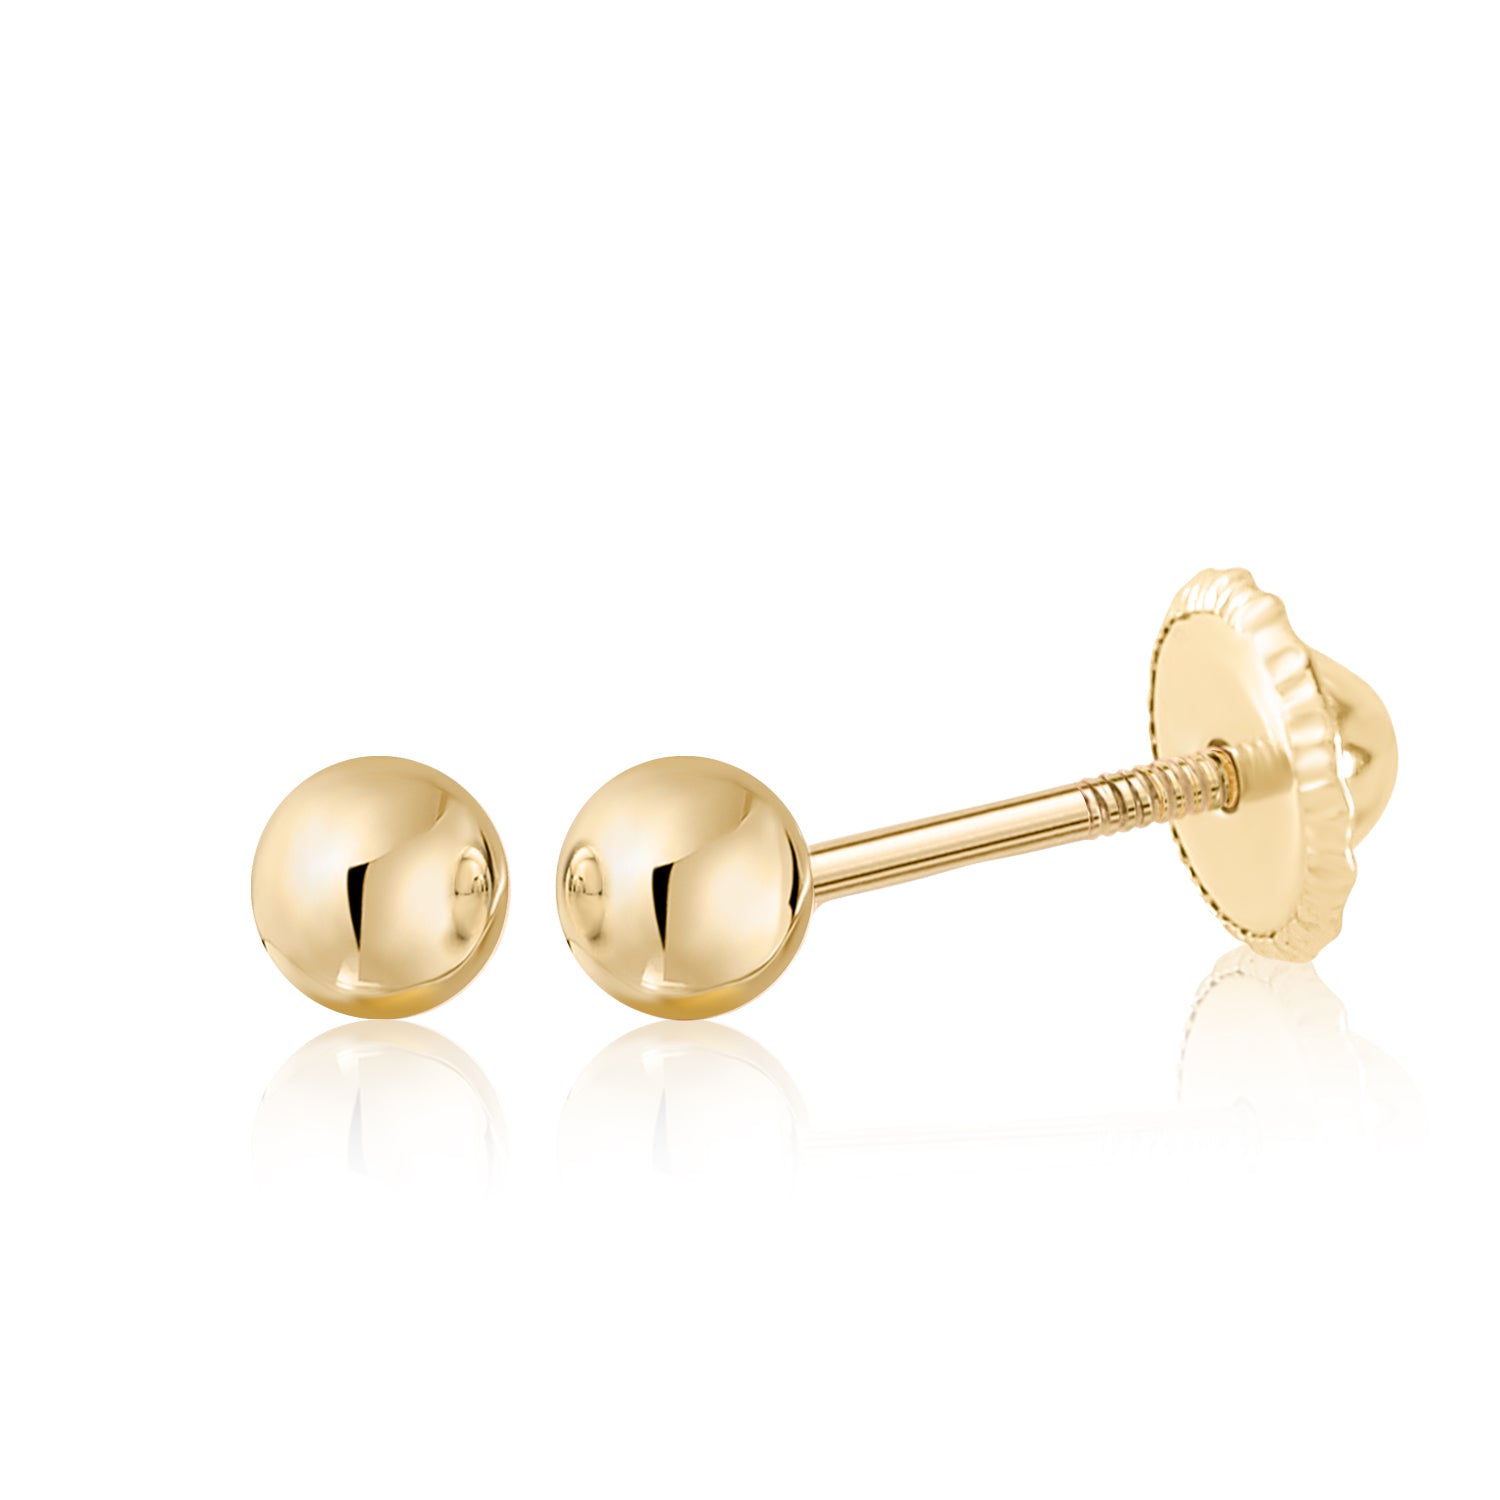 14k Solid Gold Ball Earrings with Flat Covered Back Screwback Shiny Sphere Earring Studs 3mm 4mm 5mm